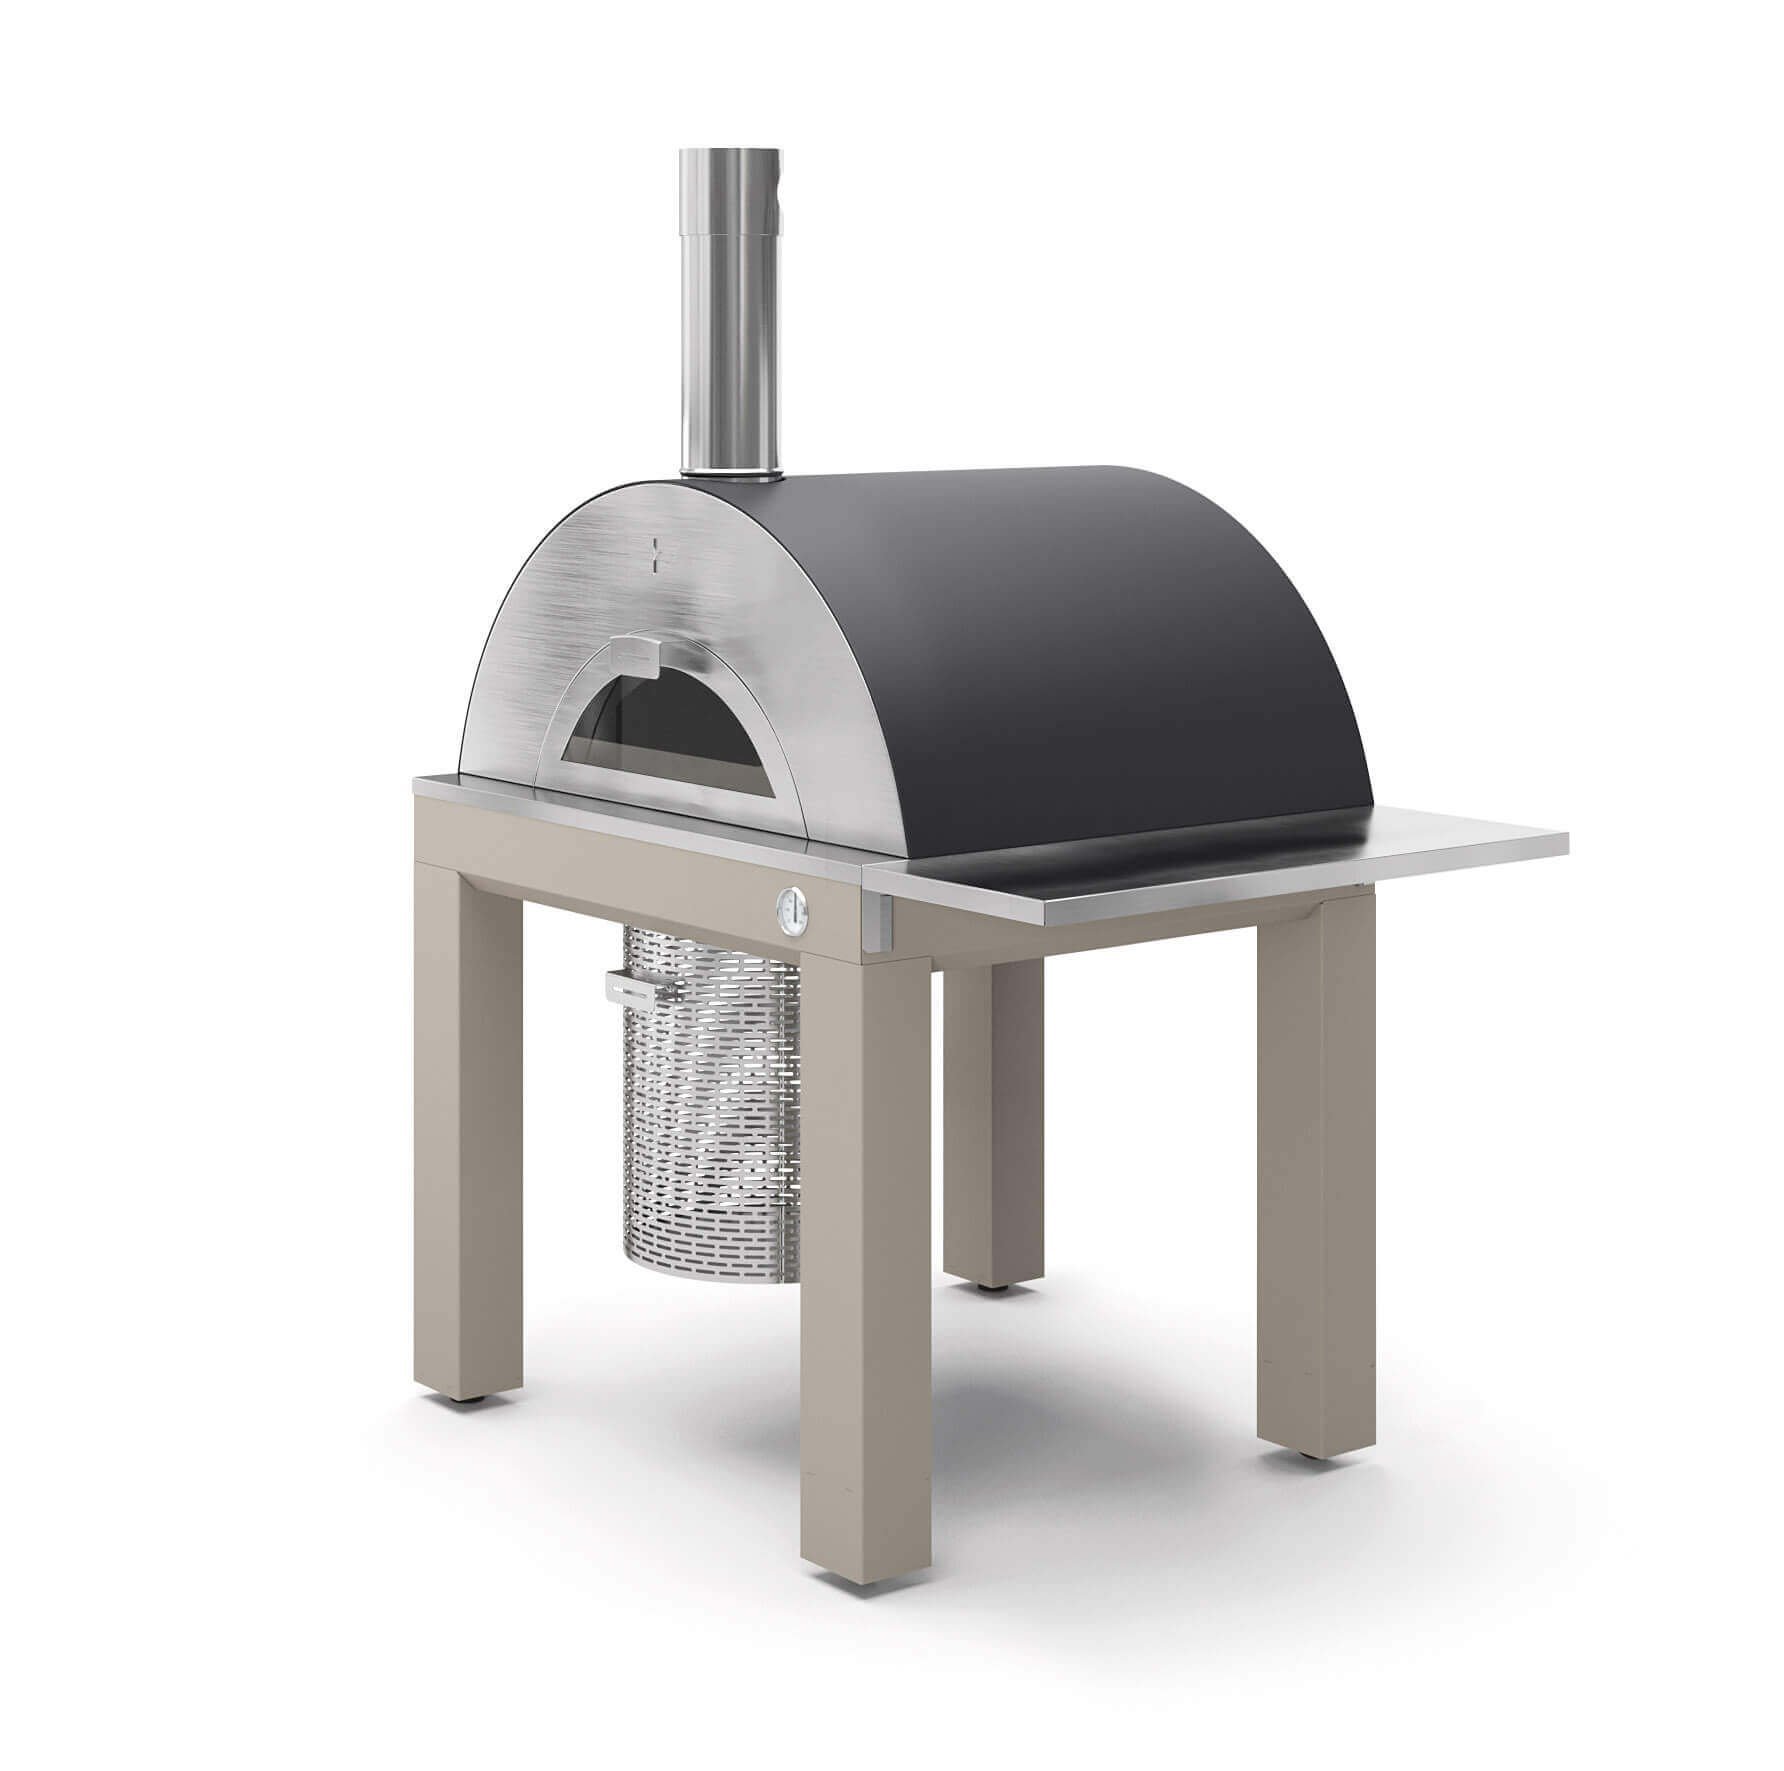 Pizza ovens Fontana Bellagio & Riviera, dome oven with gas firing gas, stainless steel